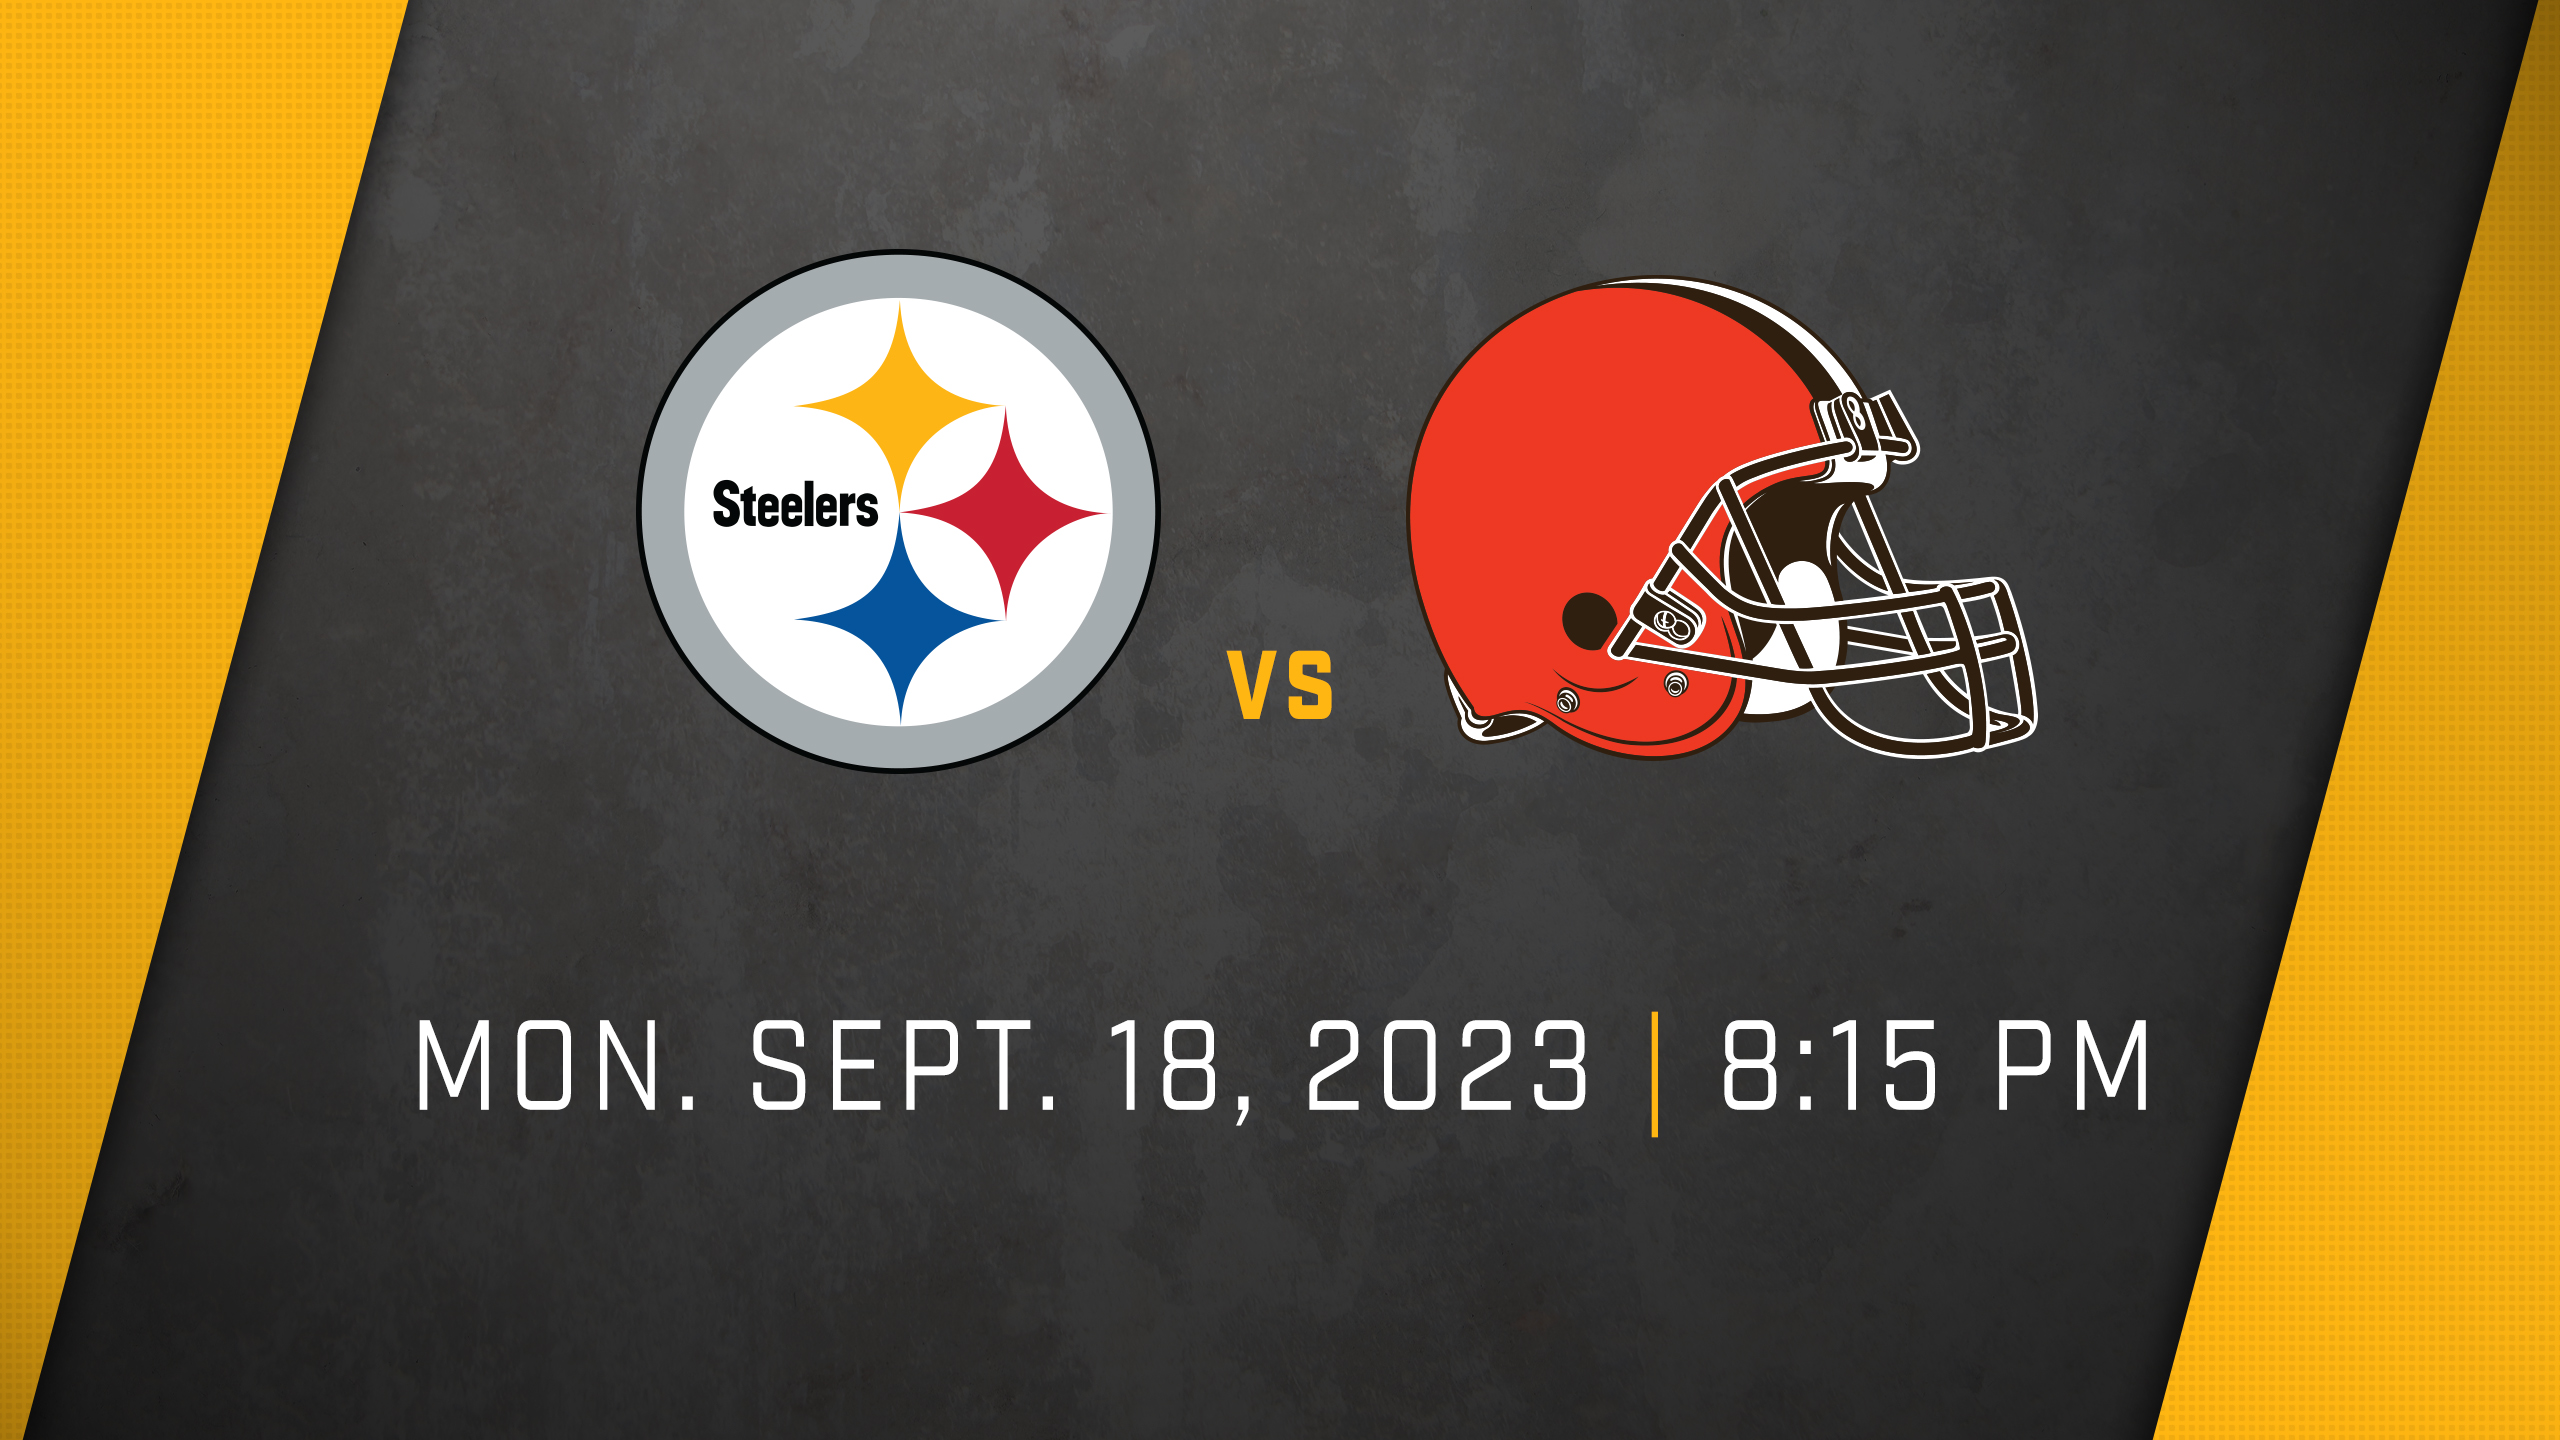 Pittsburgh Steelers vs. Cleveland Browns - Acrisure Stadium in